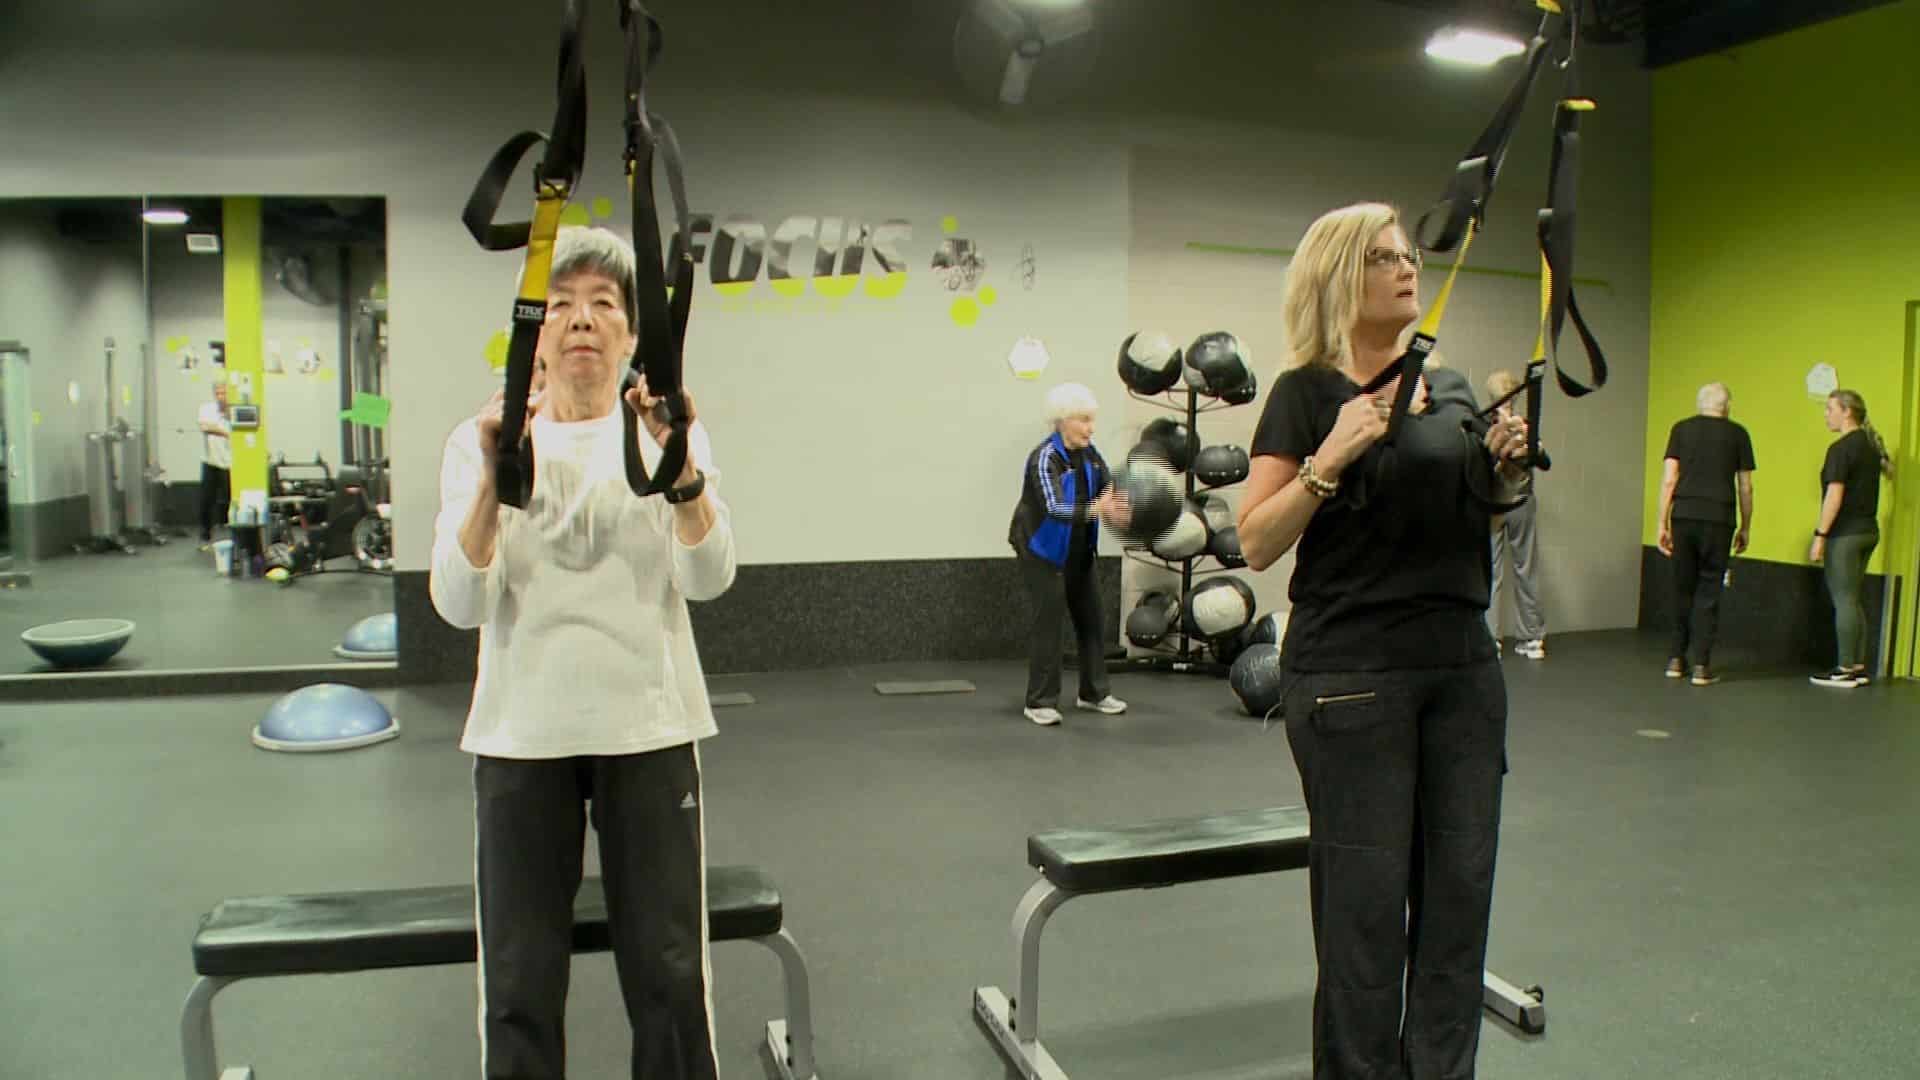 This exercise class can help those living with Parkinsonâs disease ...